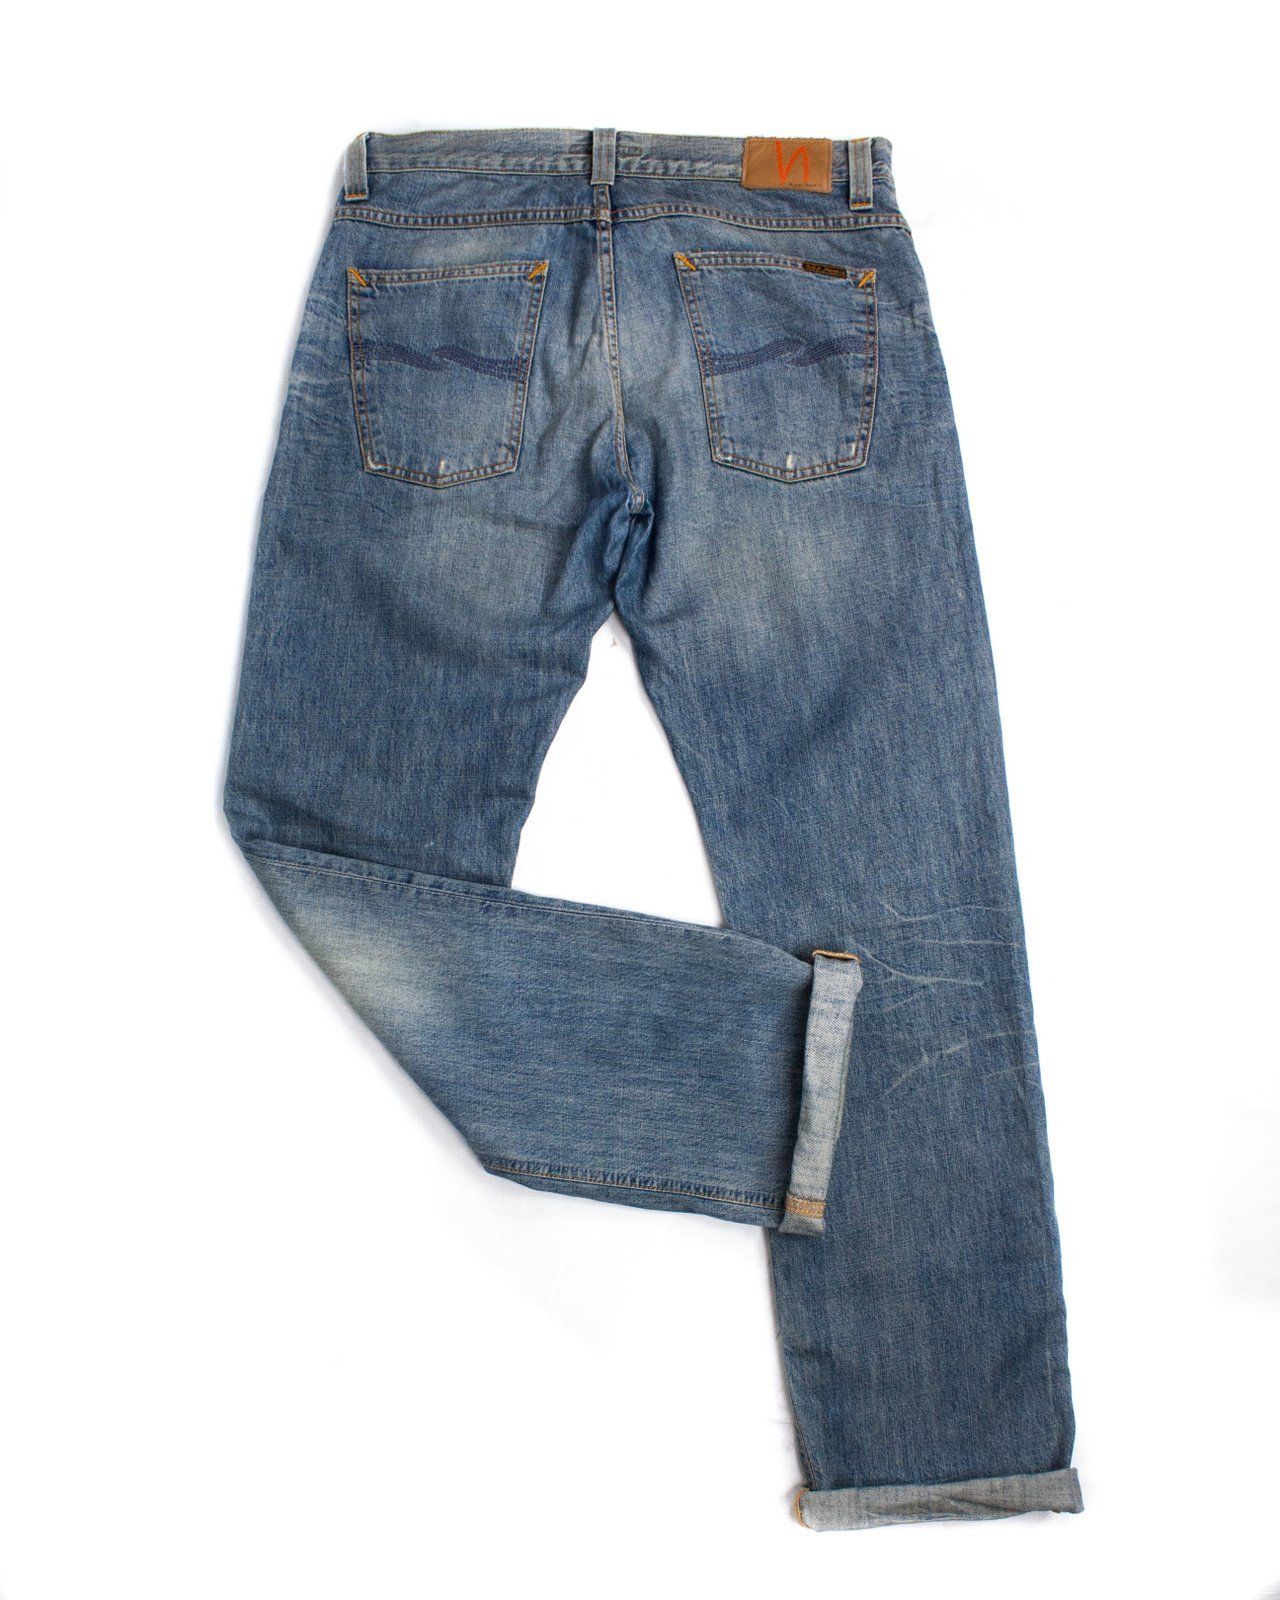 NUDIE JEANS Regular Straight Jeans, 34/34 - secondfirst